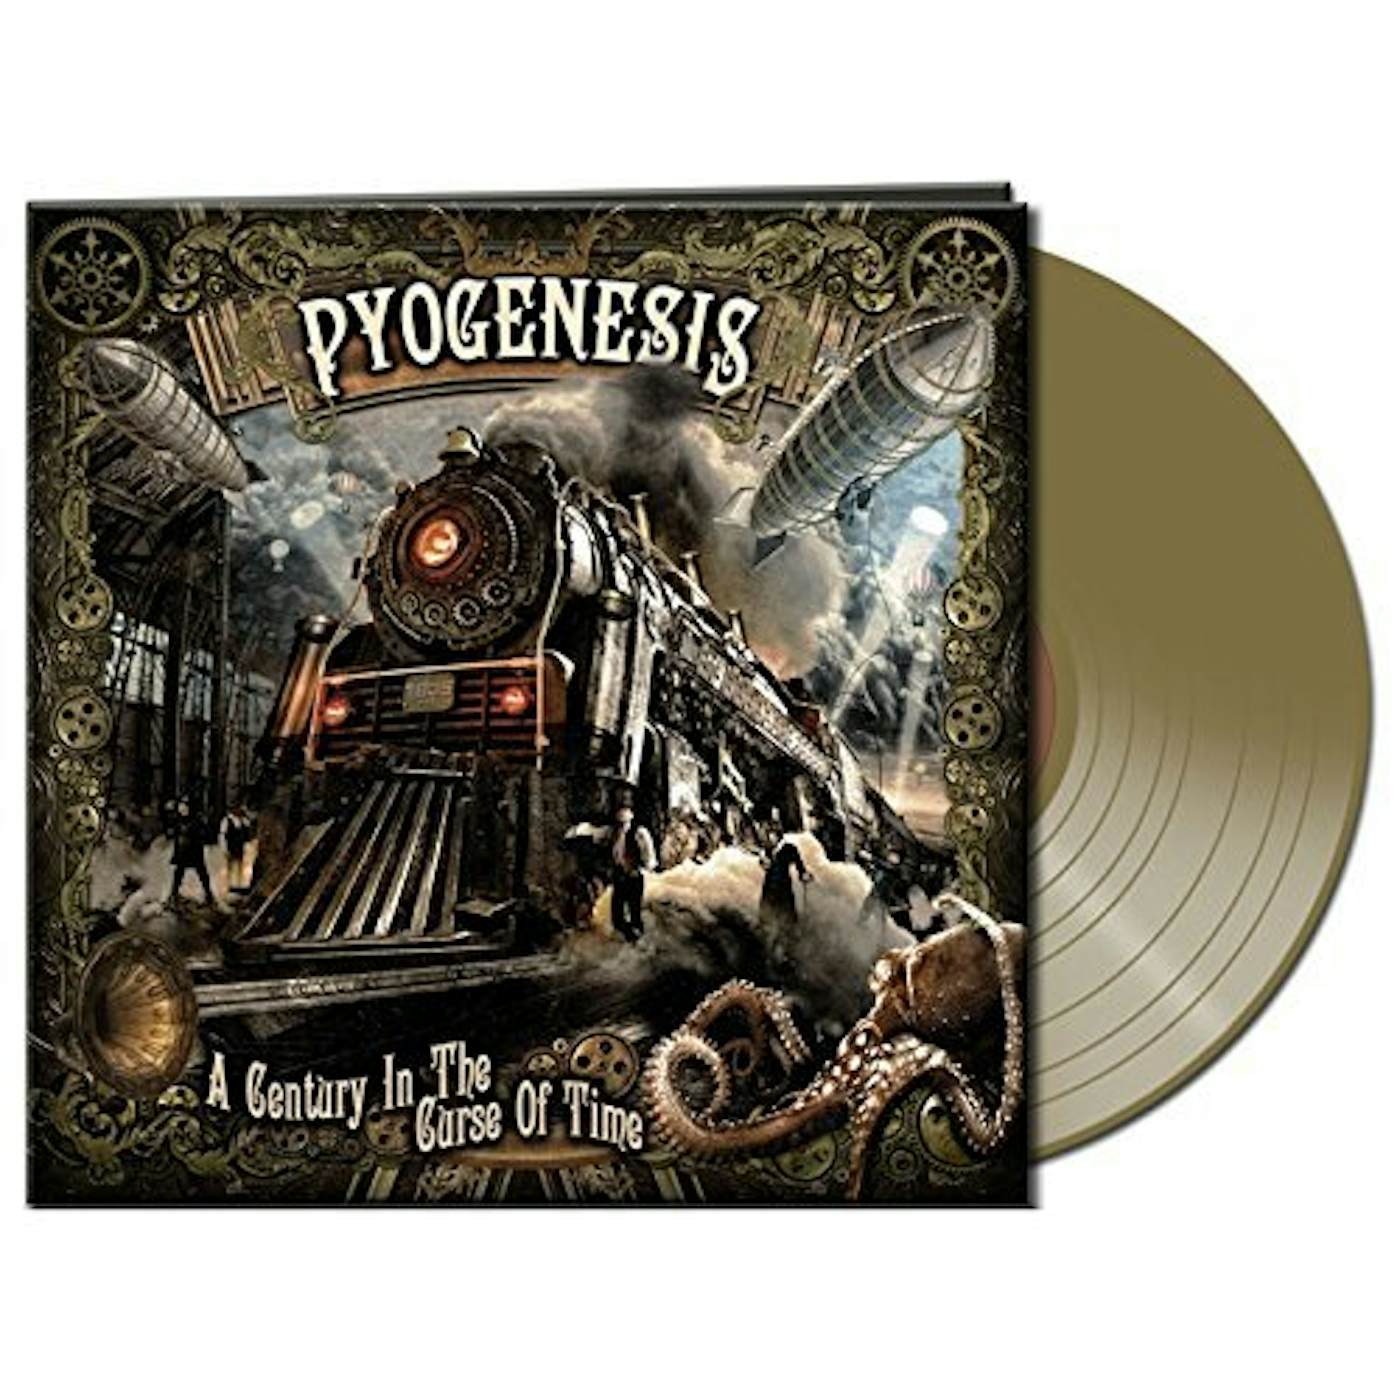 Pyogenesis CENTURY IN THE CURSE OF TIME Vinyl Record